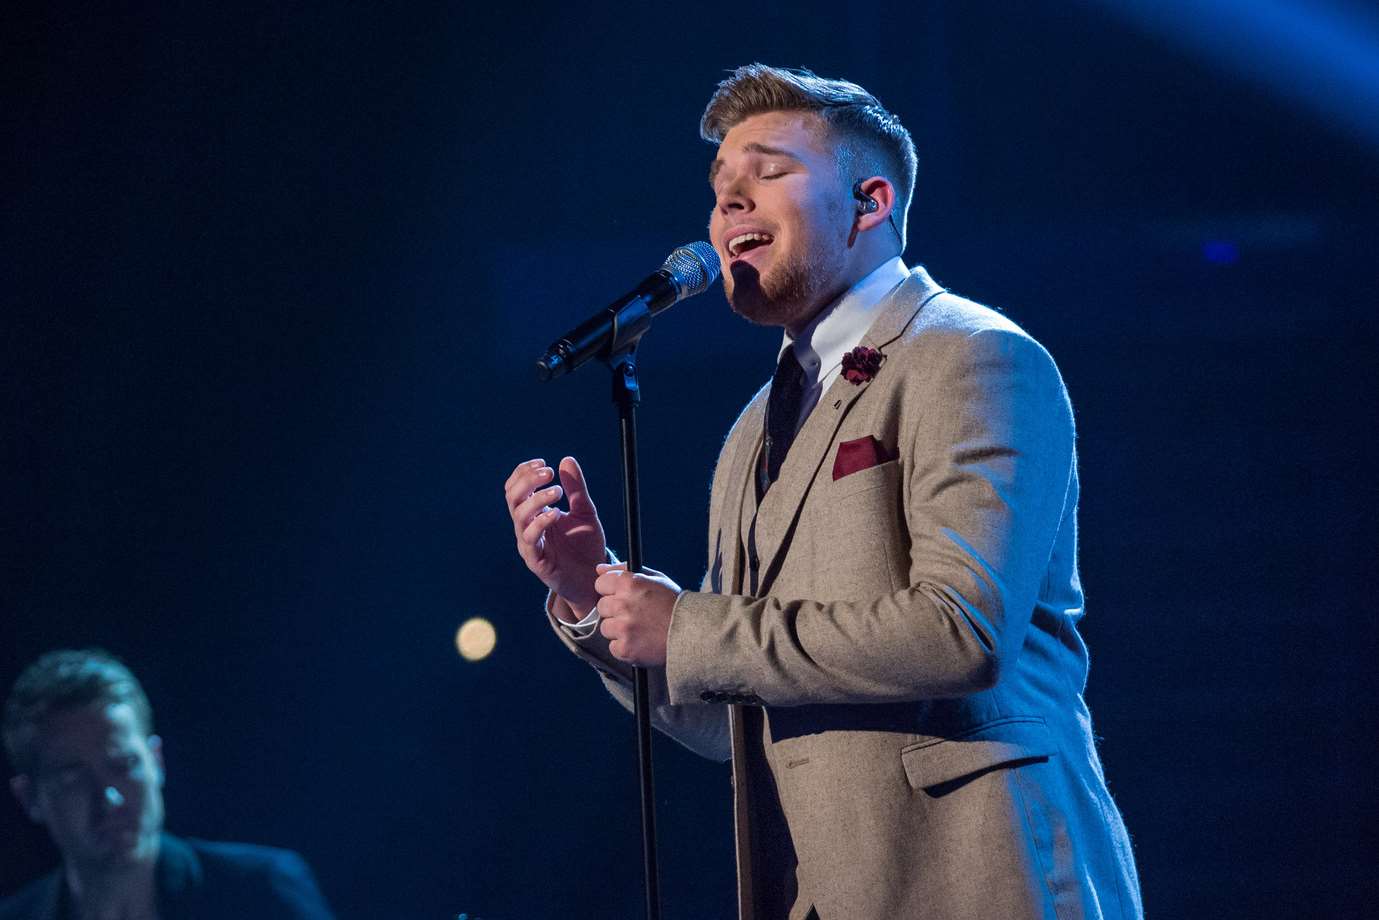 Jamie Johnson on The Voice on Saturday March 29. Image courtesy of the BBC.